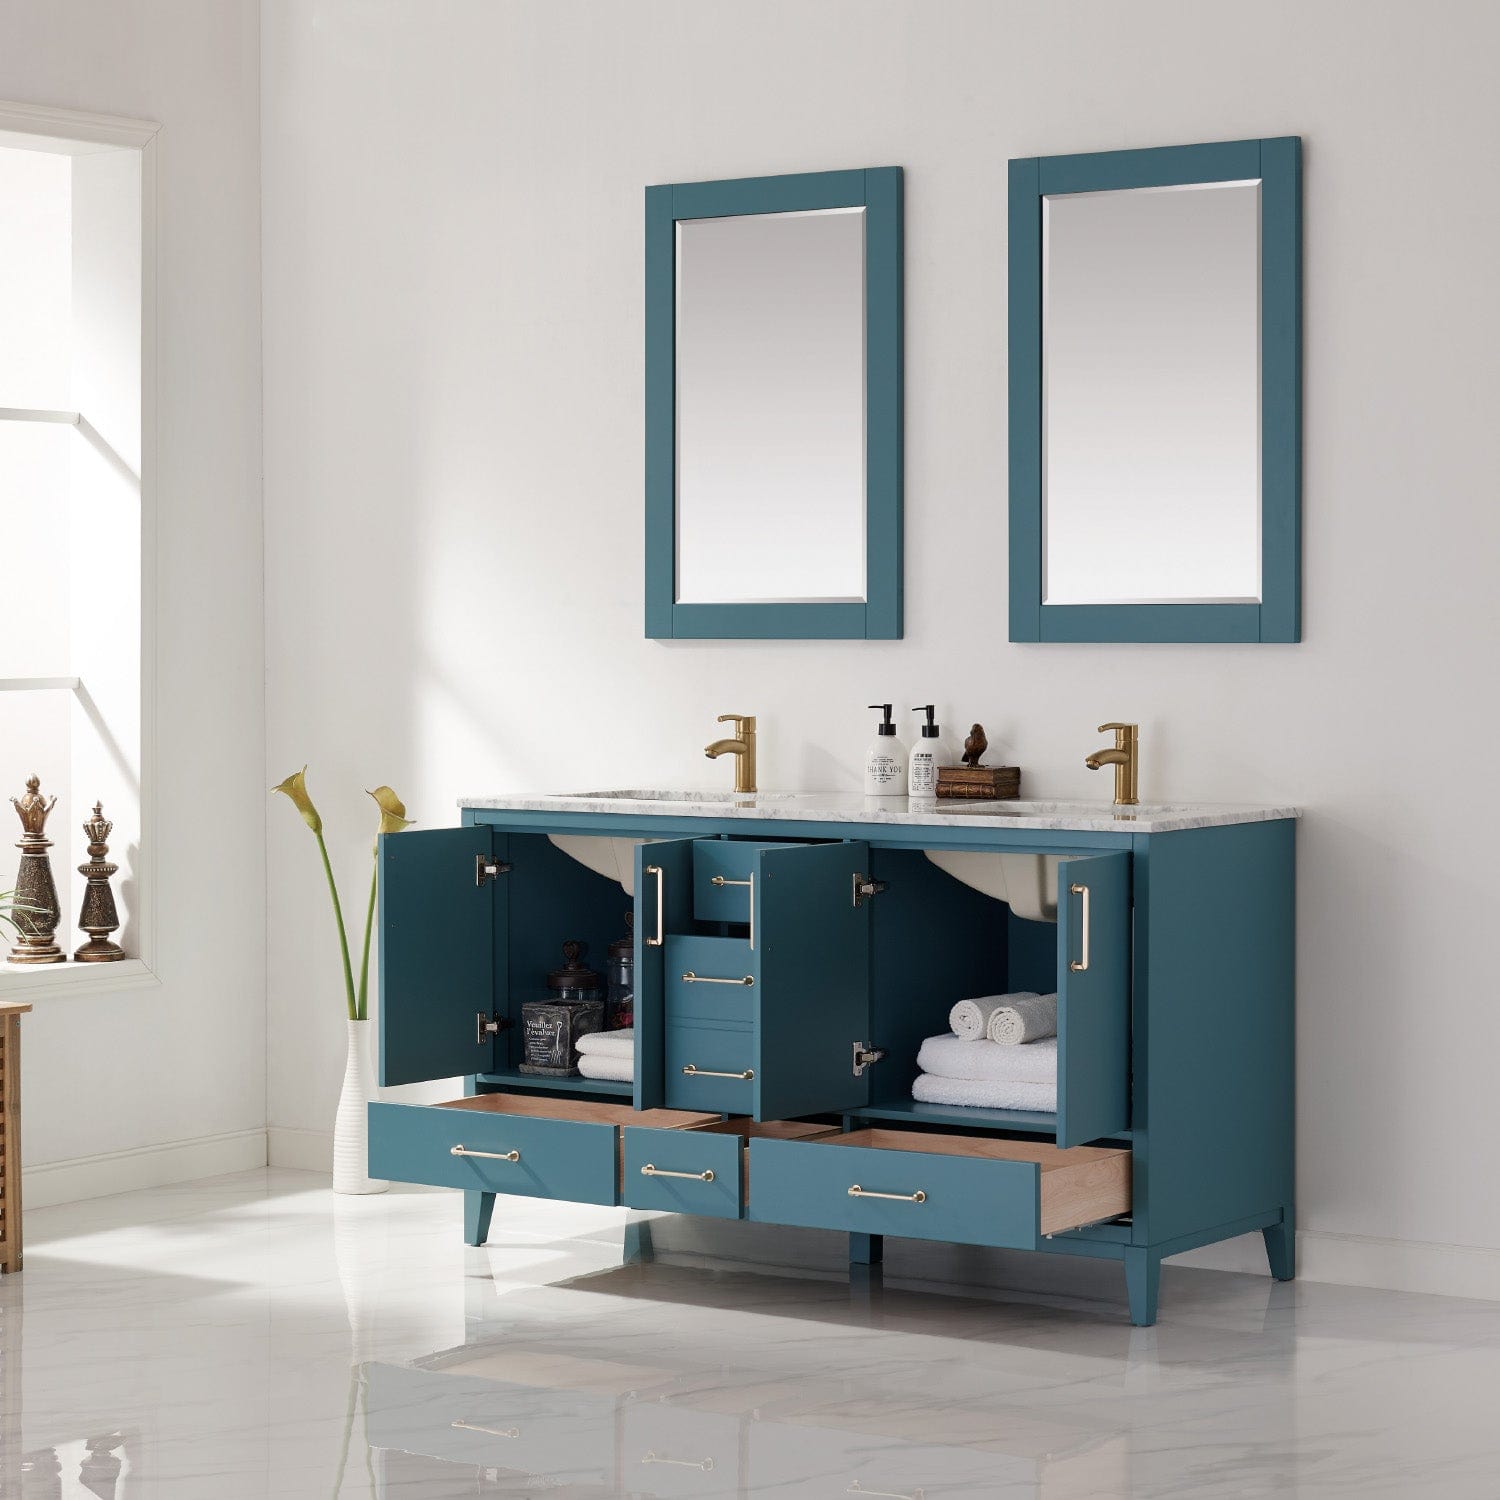 Altair Sutton 60" Double Bathroom Vanity Set in Royal Green and Carrara White Marble Countertop with Mirror 541060-RG-CA - Molaix631112971959Vanity541060-RG-CA